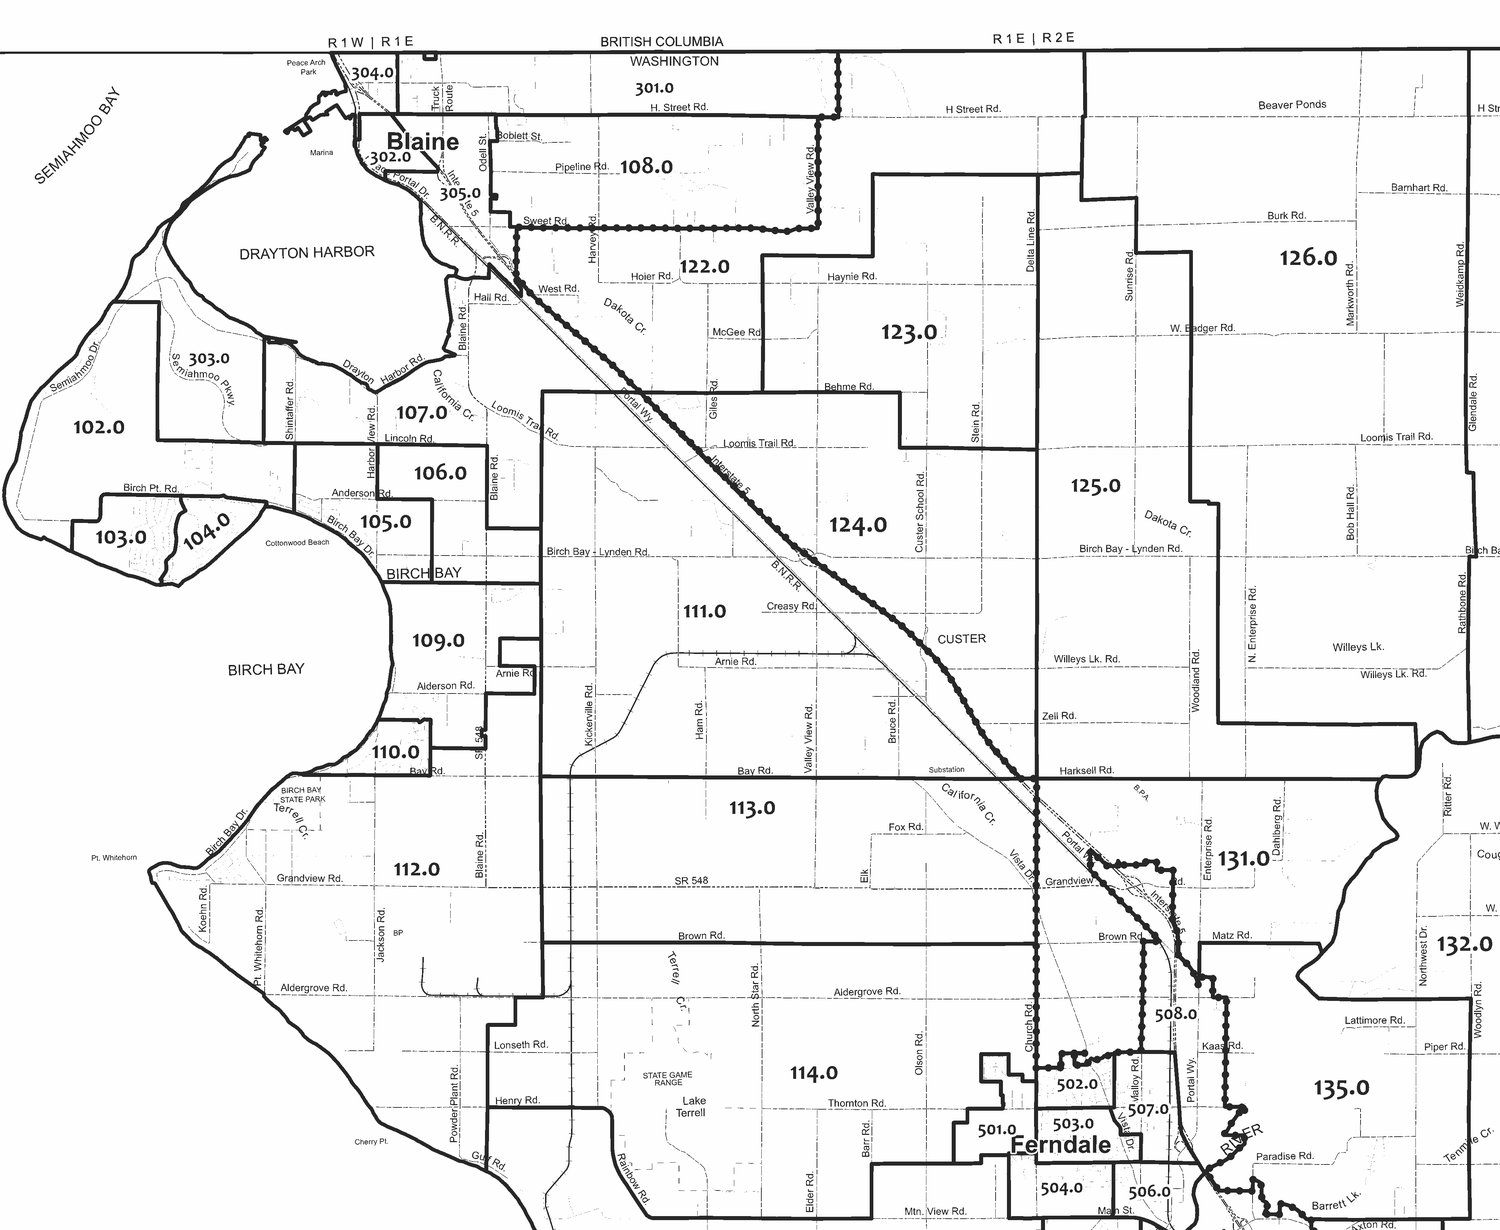 The 2022 precinct map for the Blaine, Birch Bay and Custer area.